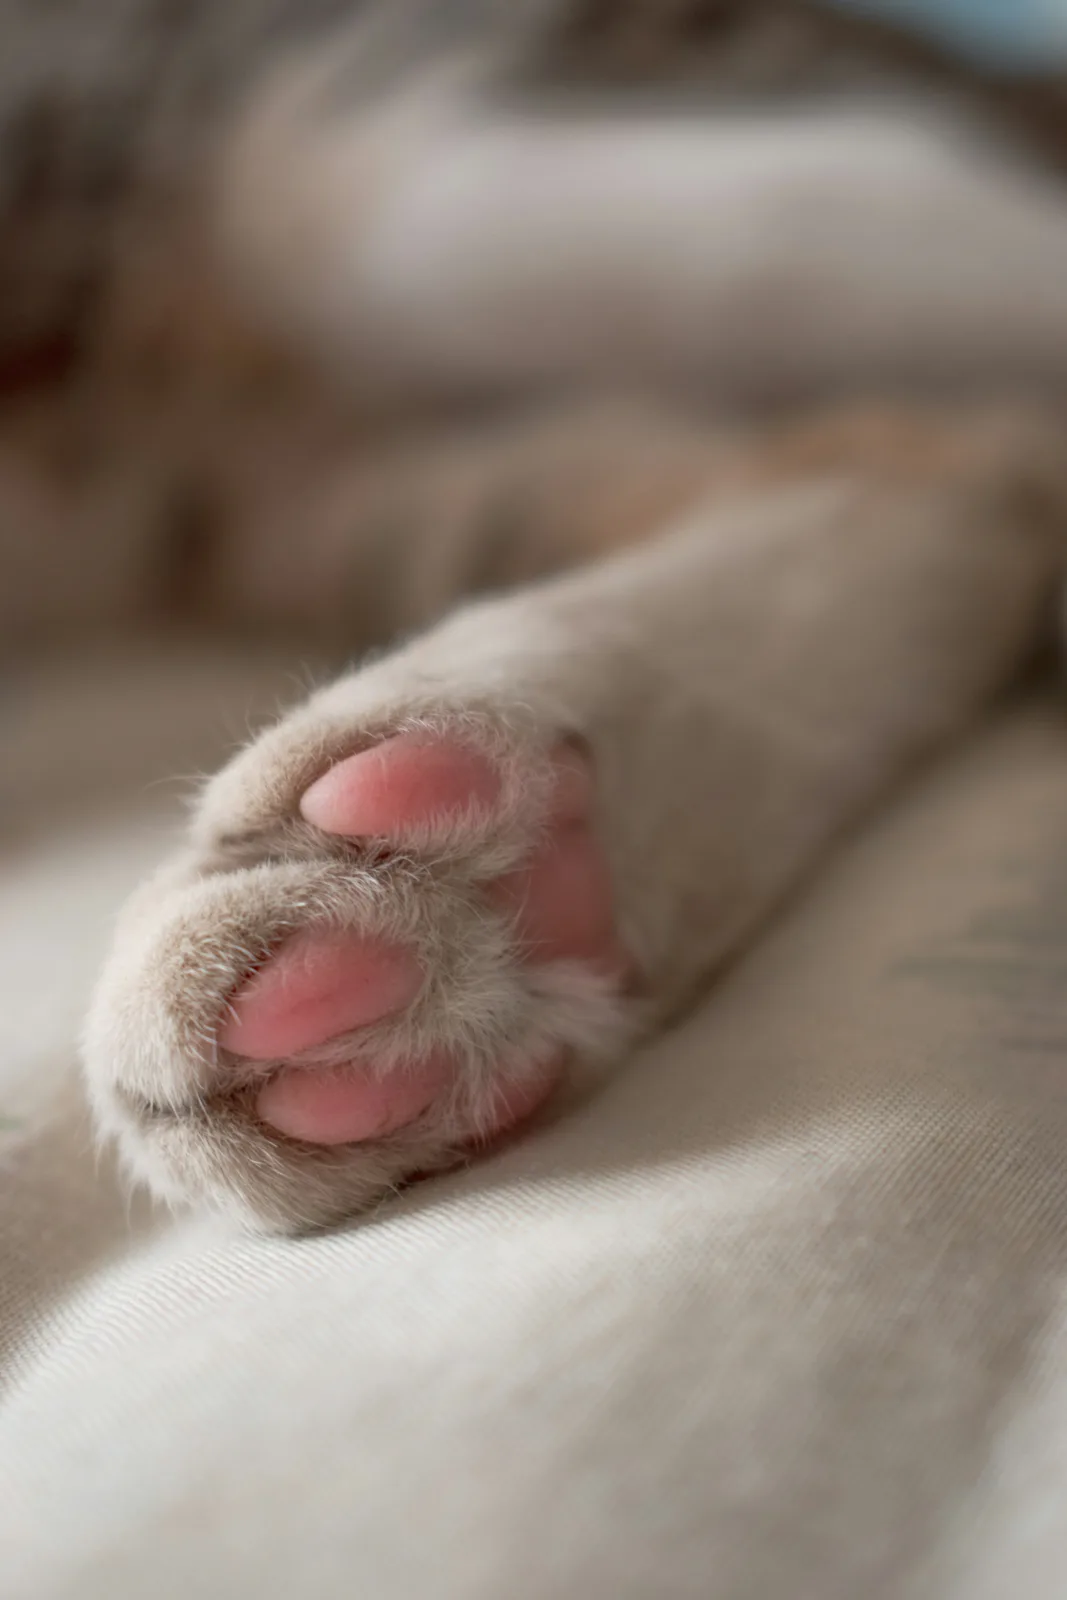 A cat's hindleg paw on closeup. Soft leathery beans are surrounded by cream colored fur.